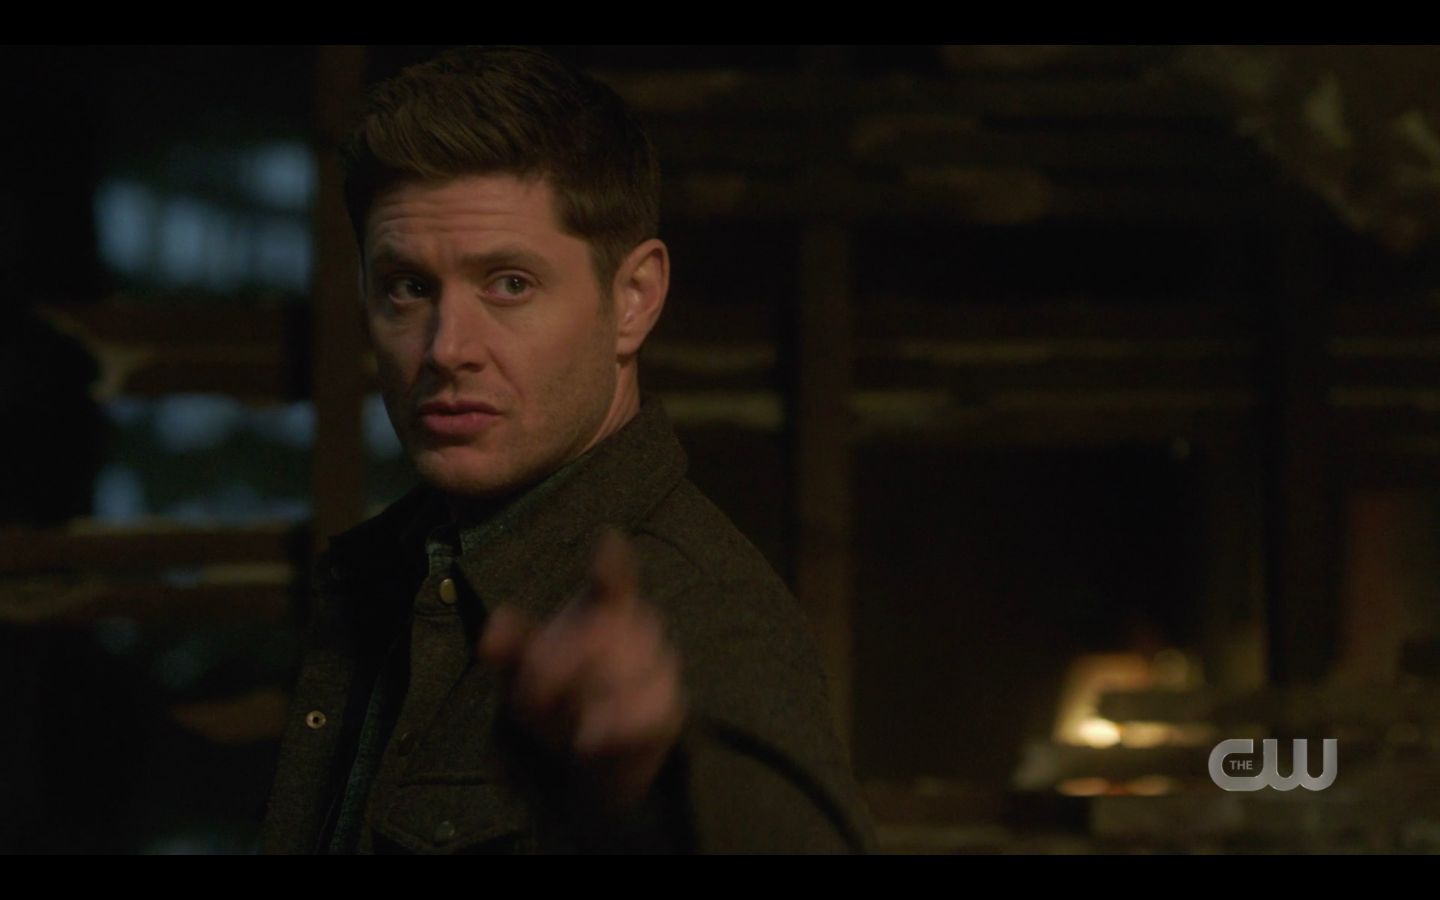 Dean Winchester to Castiel I he did something to her then your dead to me about Mary SPN Absence